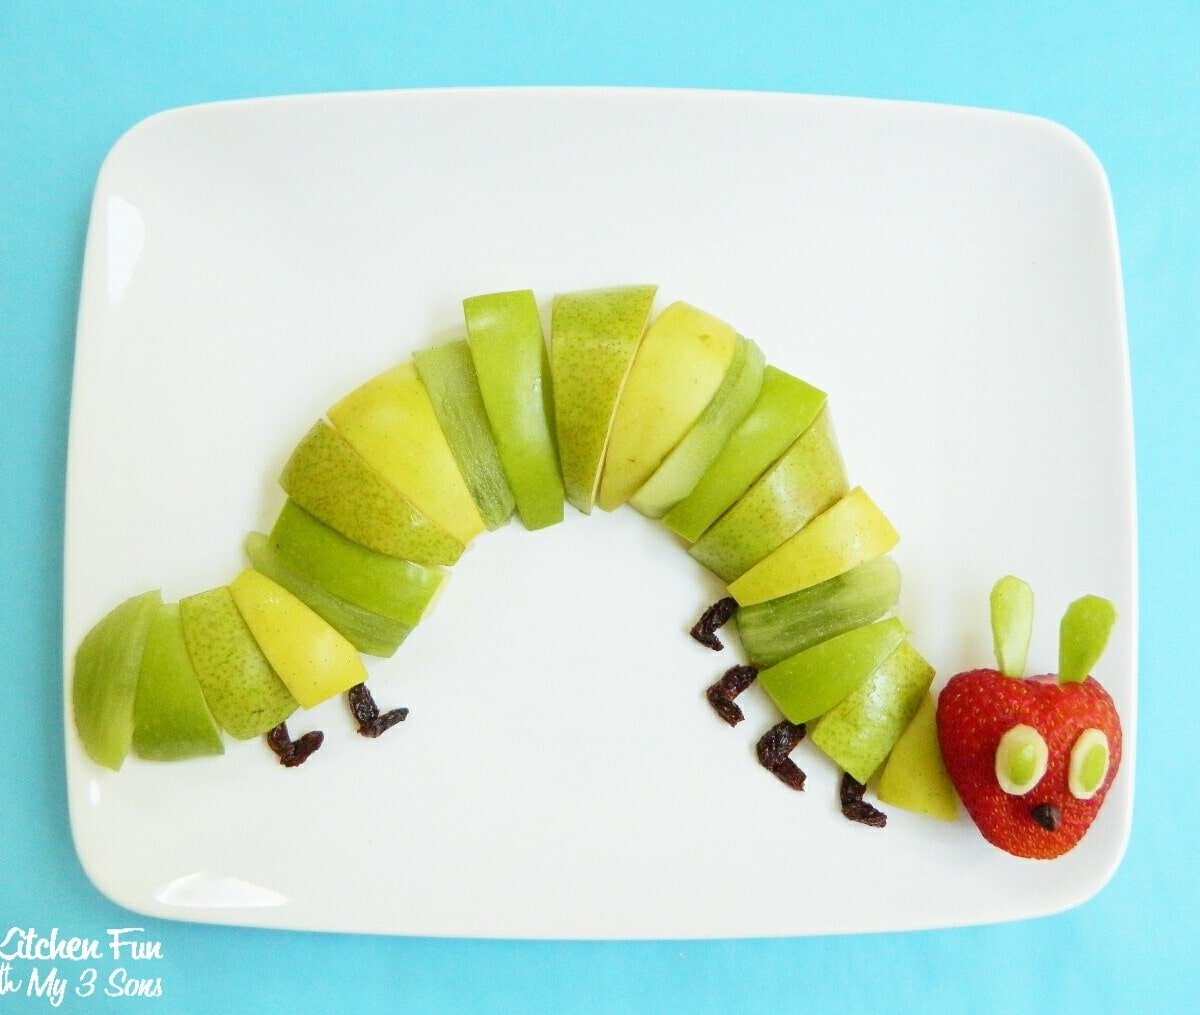 The Very Hungry Caterpillar Fruit Snack with apple pear and strawberry